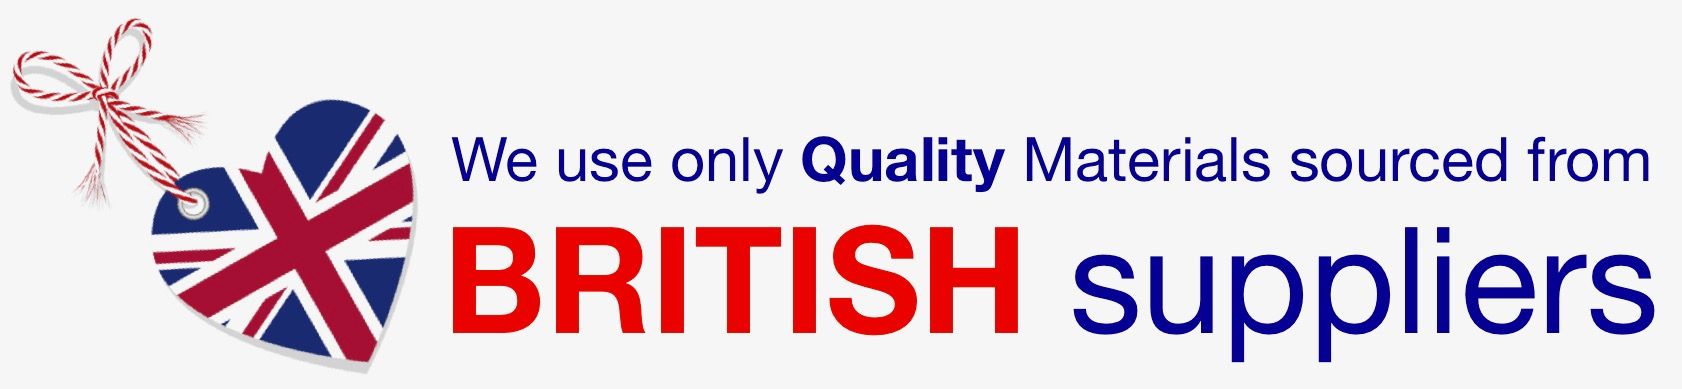 Northampton driveway and patio specialists Quality Drives and Patios use only quality materials sourced from British suppliers